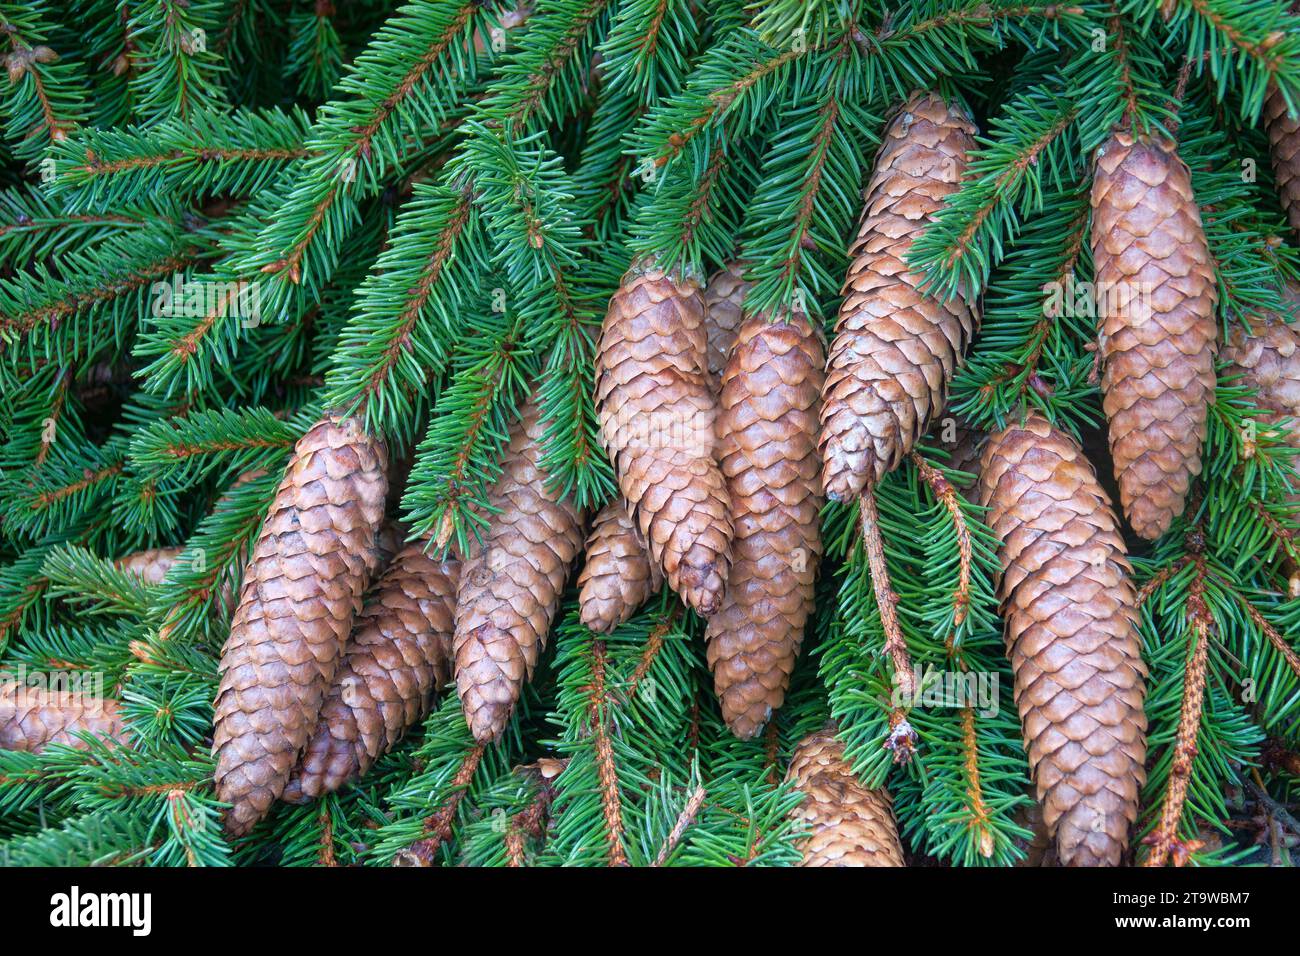 Forest science. Cones from the top of the European Spruce (Pinus sylvestris) at the age of about 100 years after winter fruiting. Boreal forests of No Stock Photo